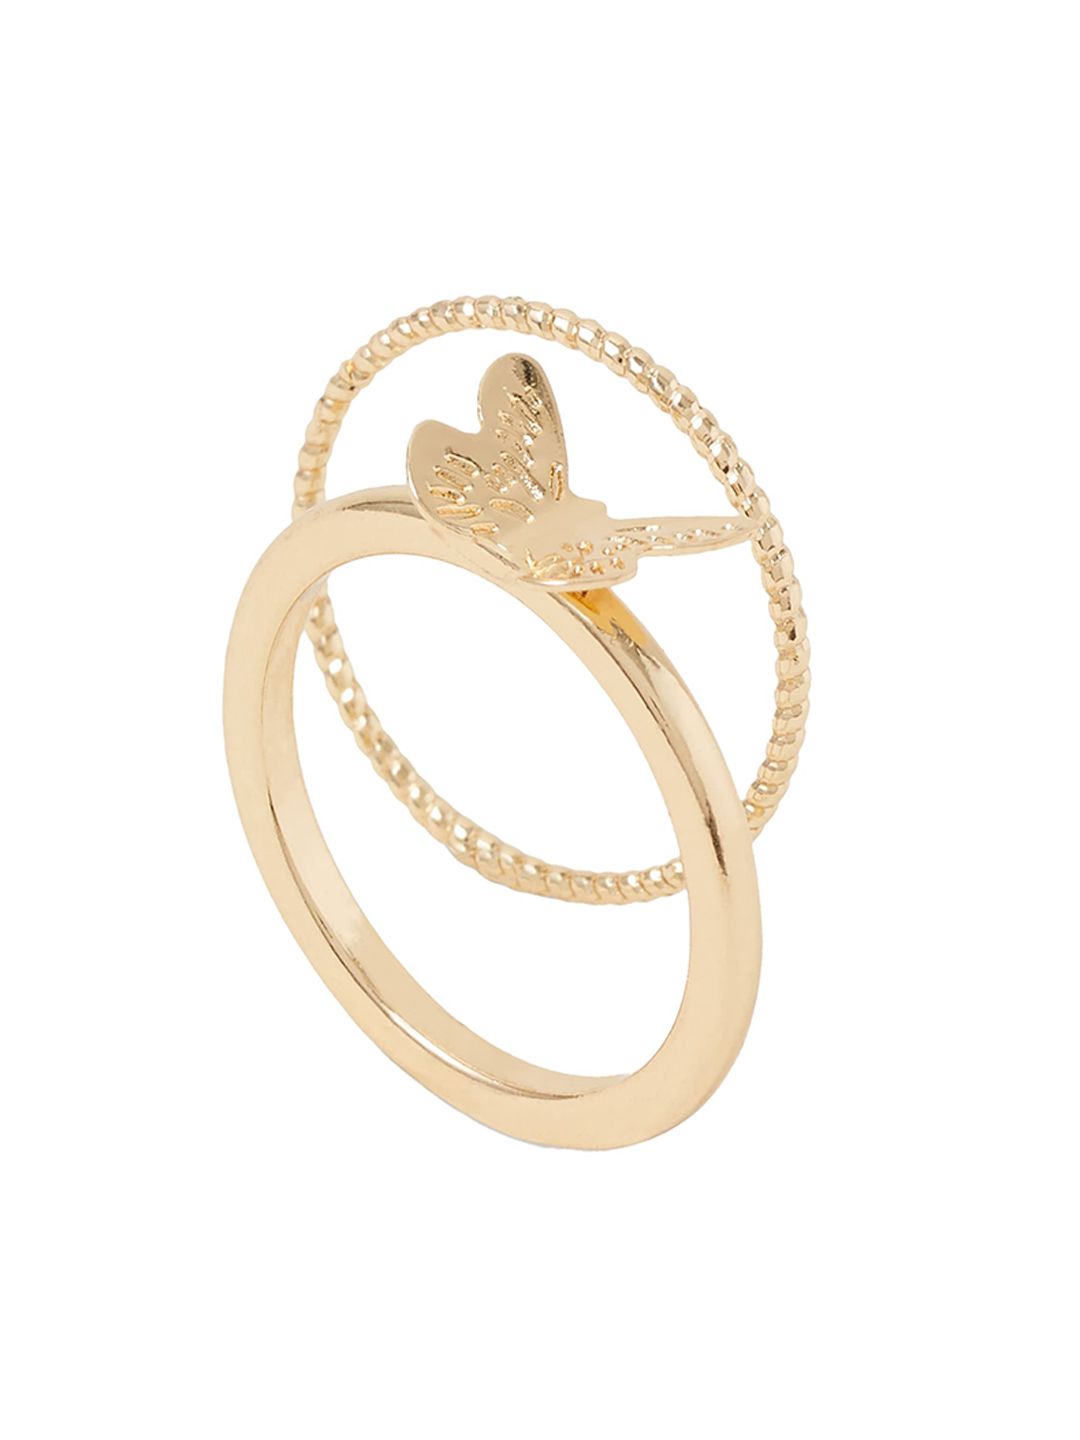 Accessorize Women Set of 2 Gold Butterfly Stacking Rings Set Price in India